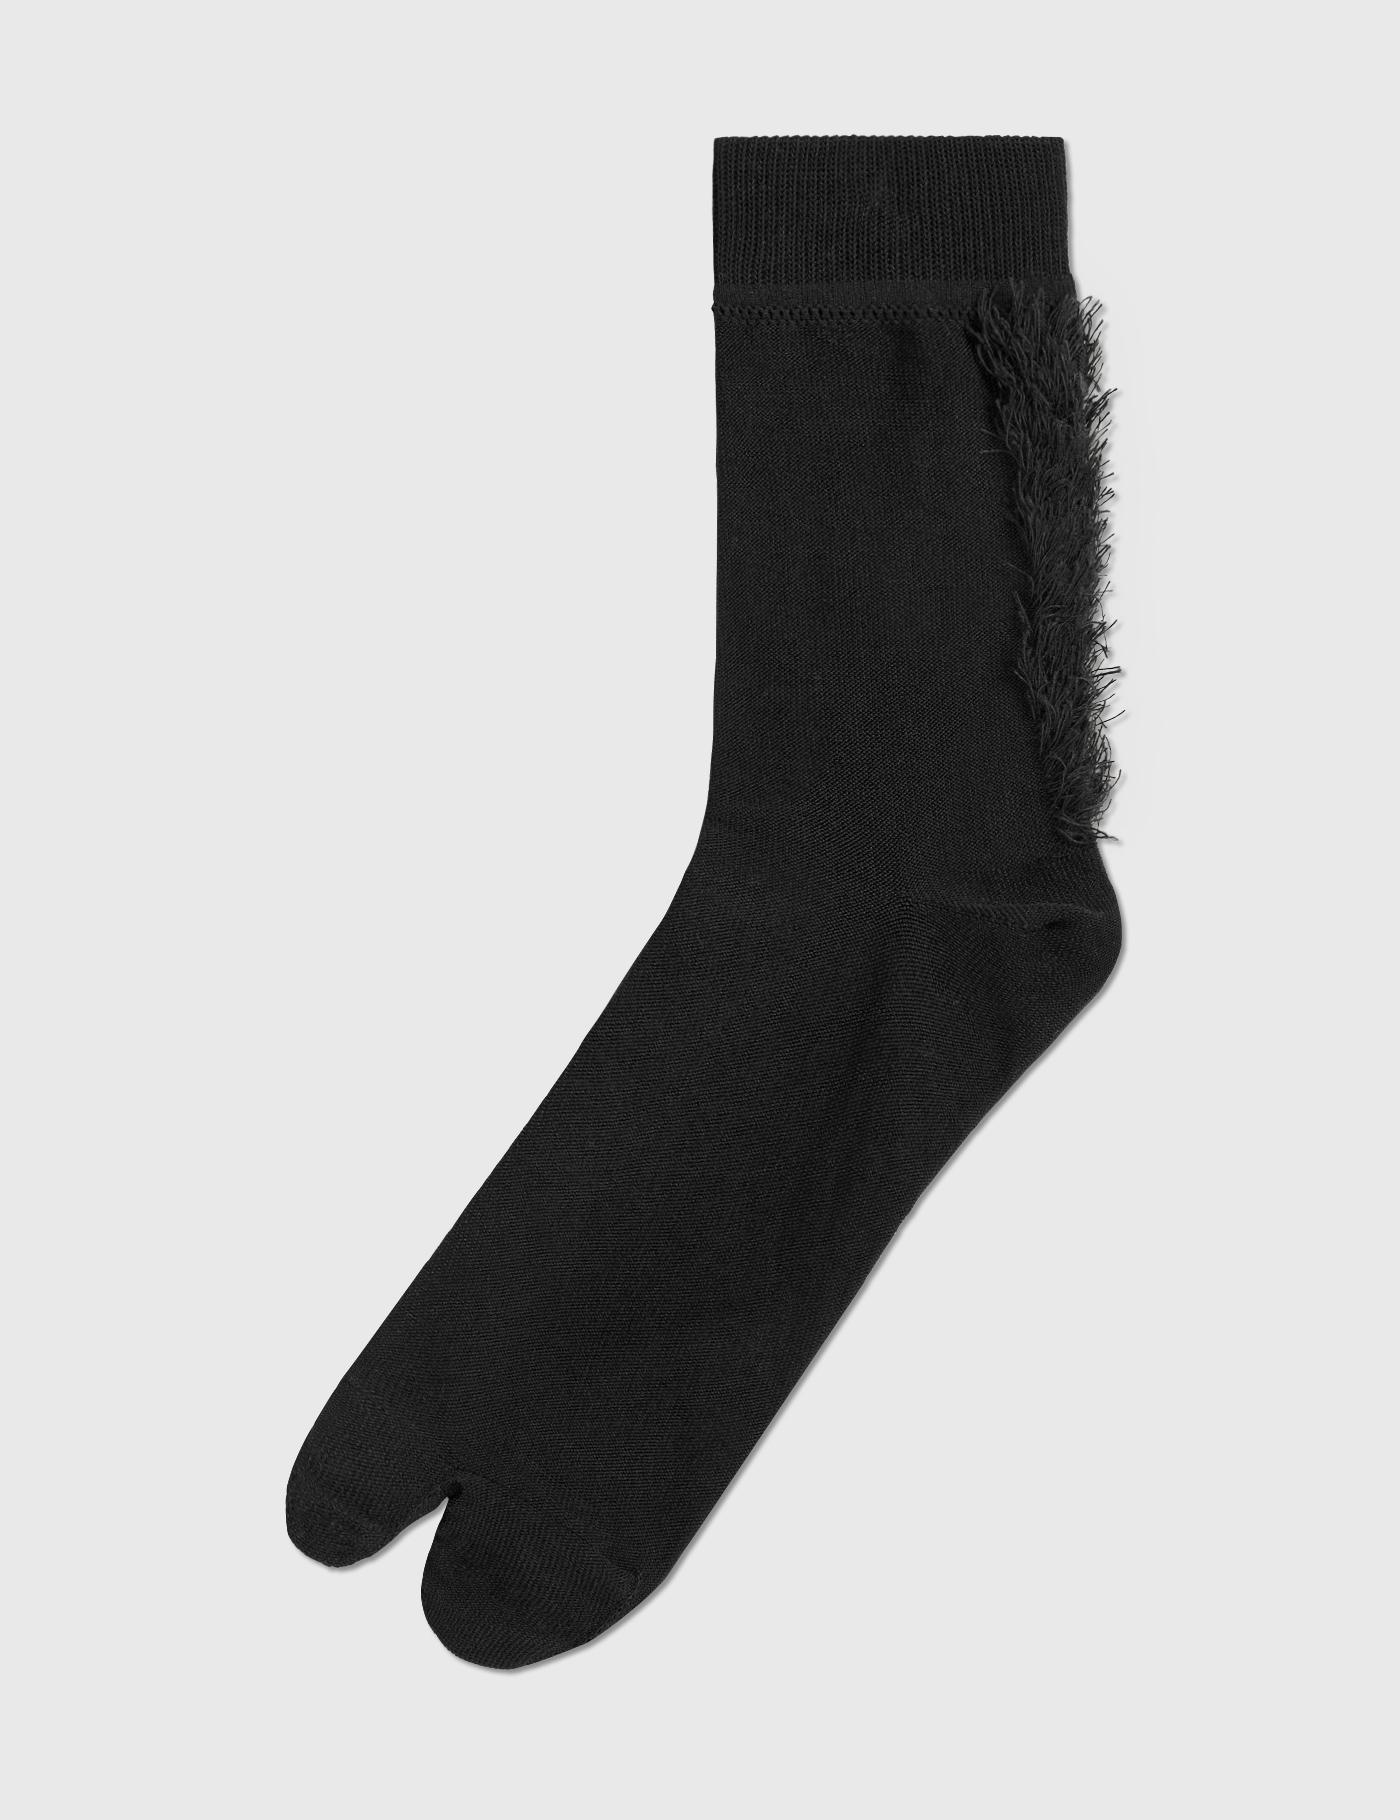 Mohican Socks by DECKA